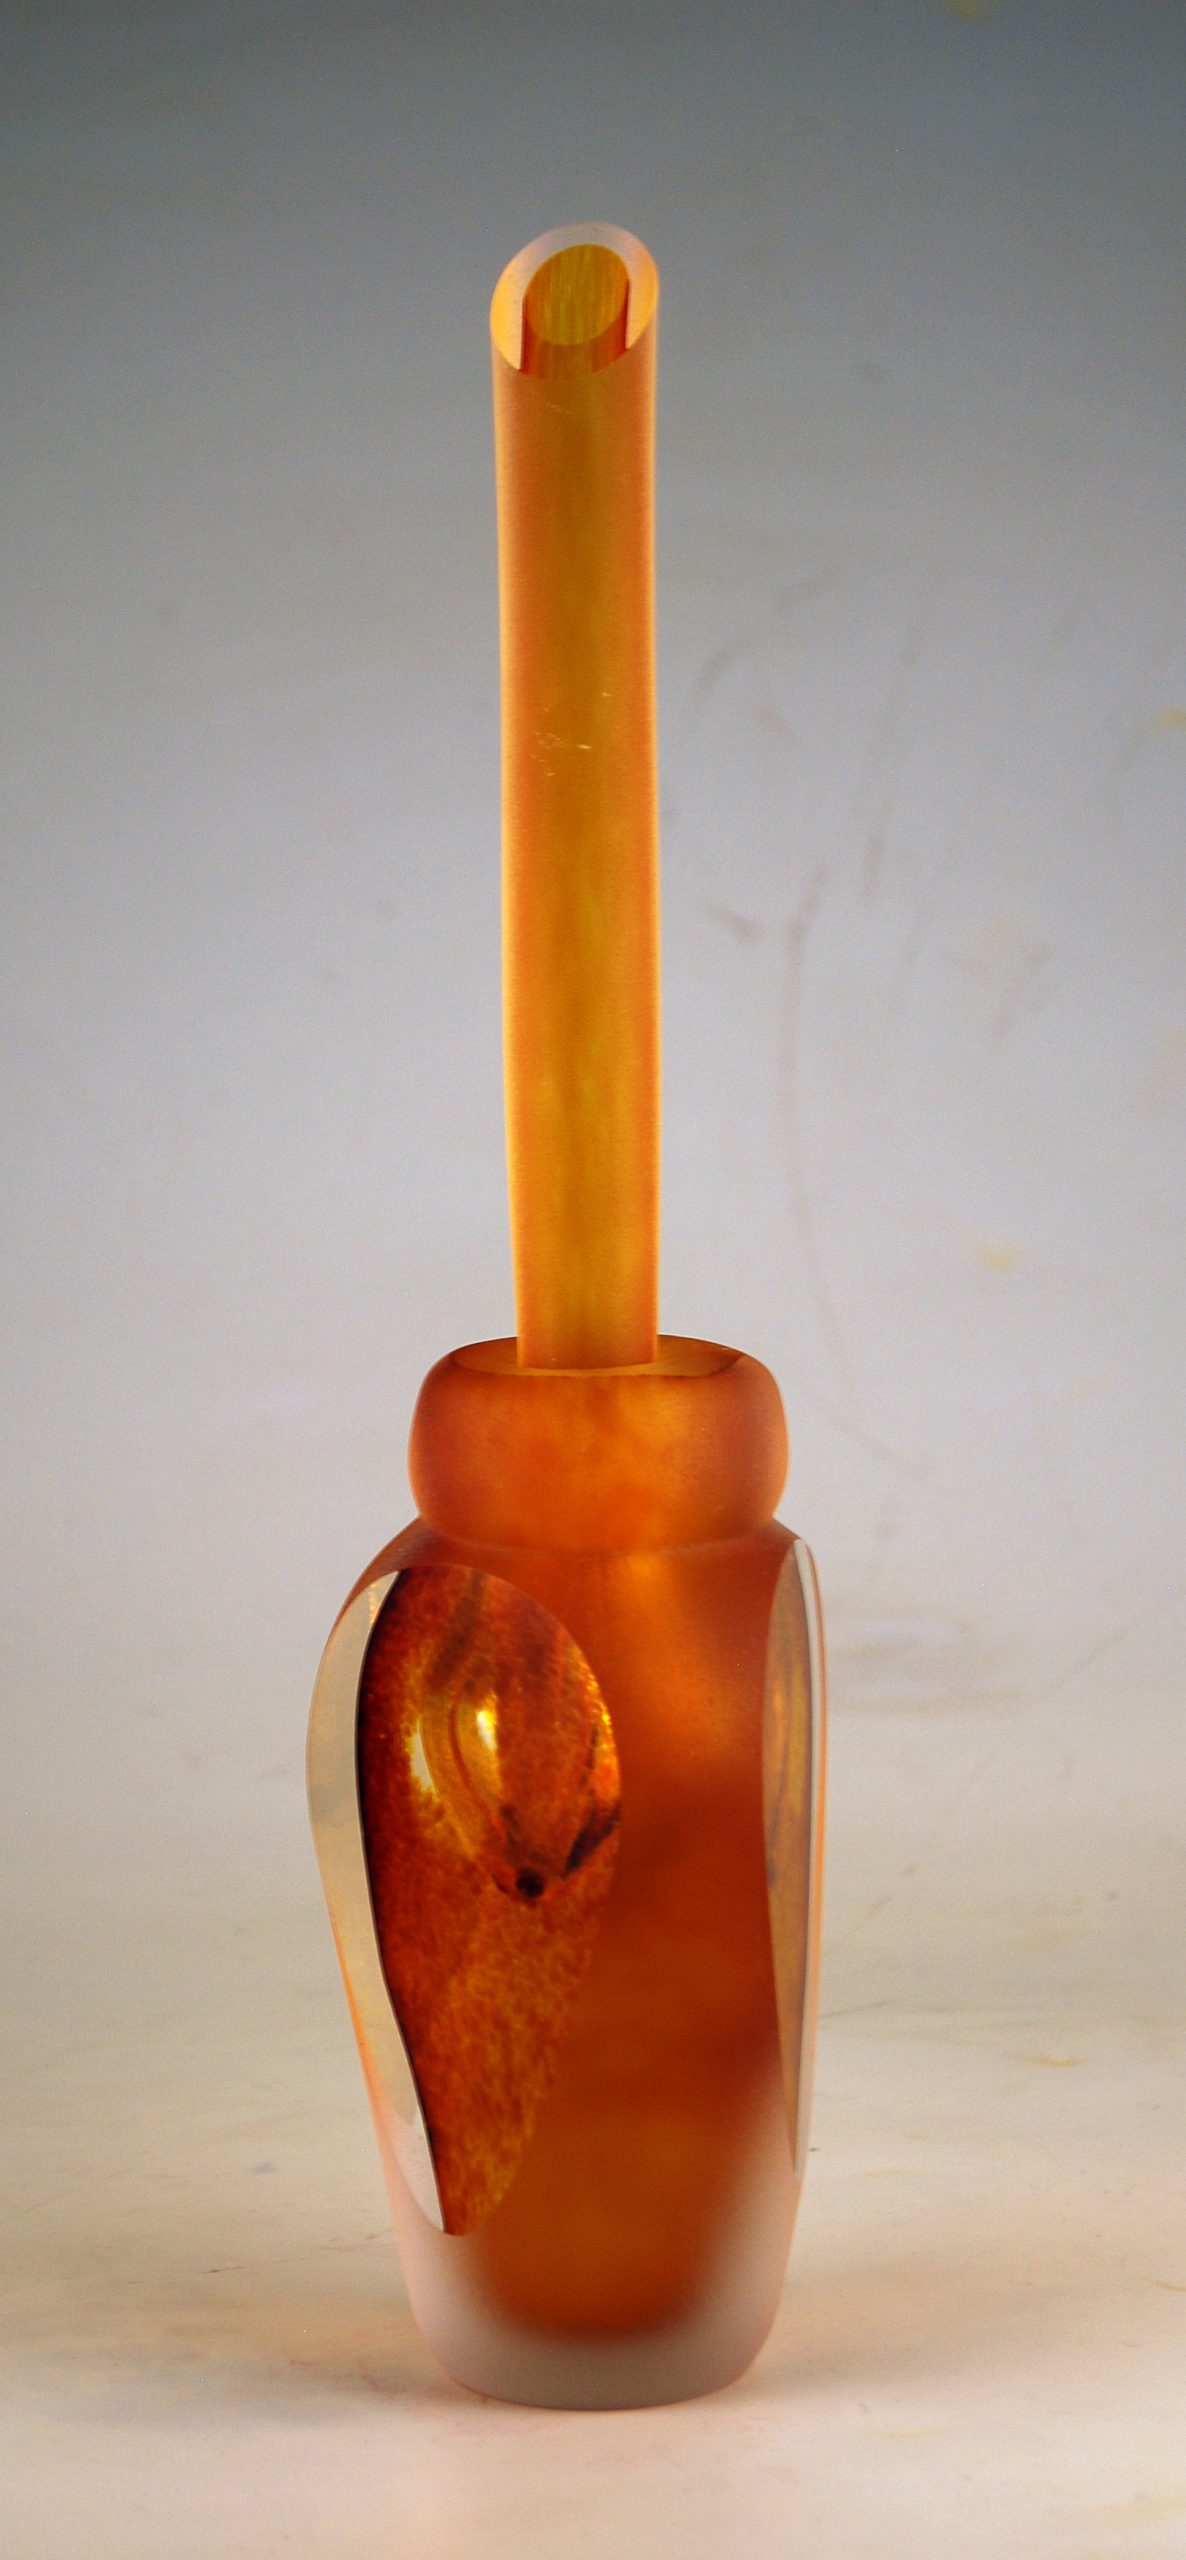 Andrew Shea, Amber Perfume Bottle with Drop Stopper, 2019, blown glass, 10.75x2.75x2.75 inches, collection of the artist